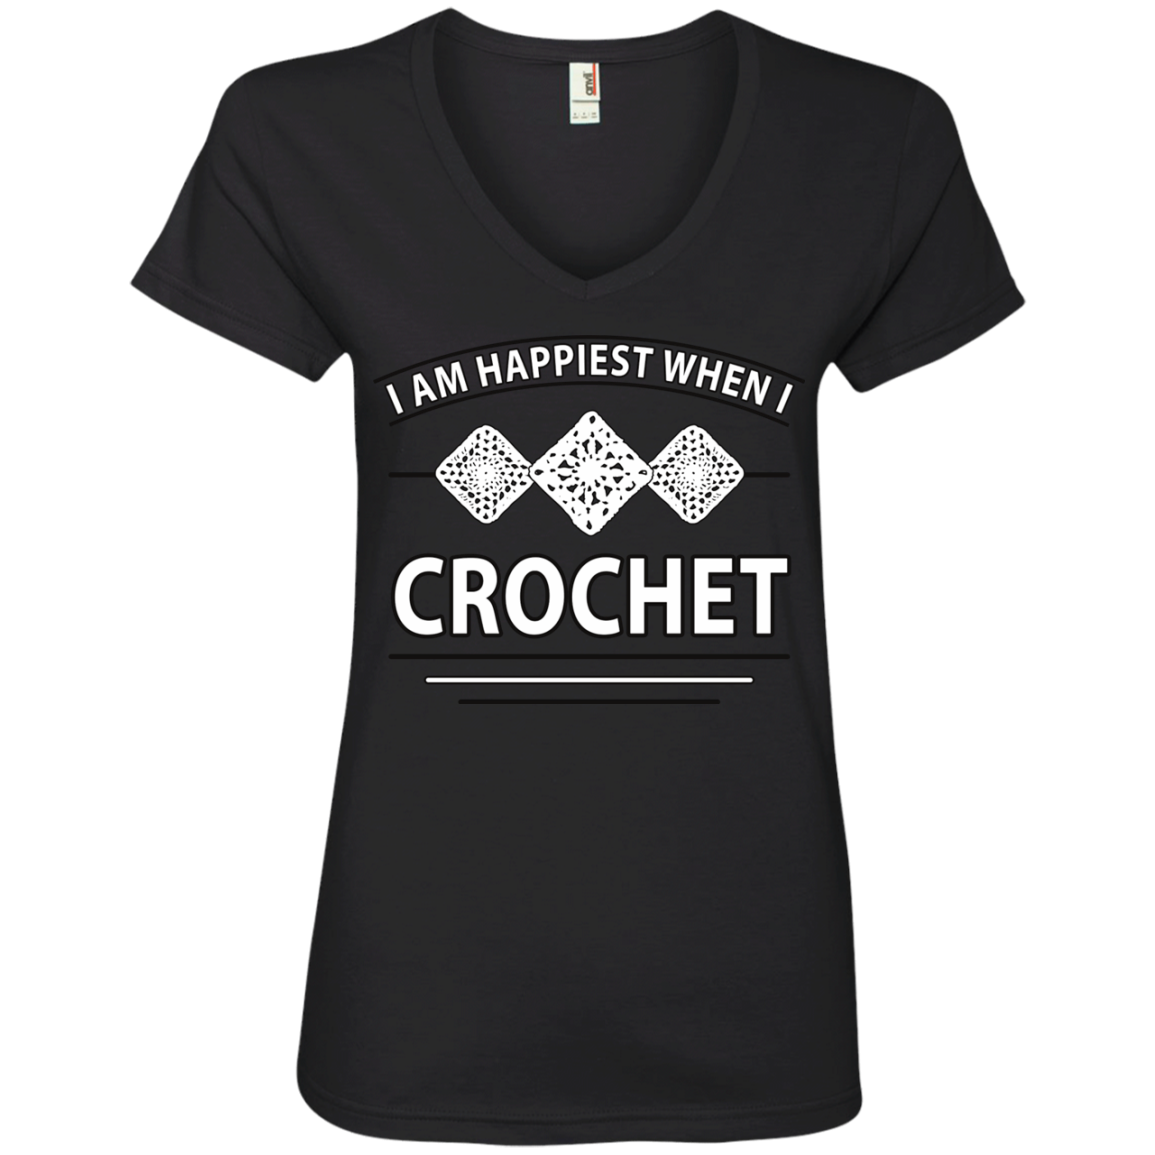 I Am Happiest When I Crochet Ladies V-neck Tee - Crafter4Life - 4